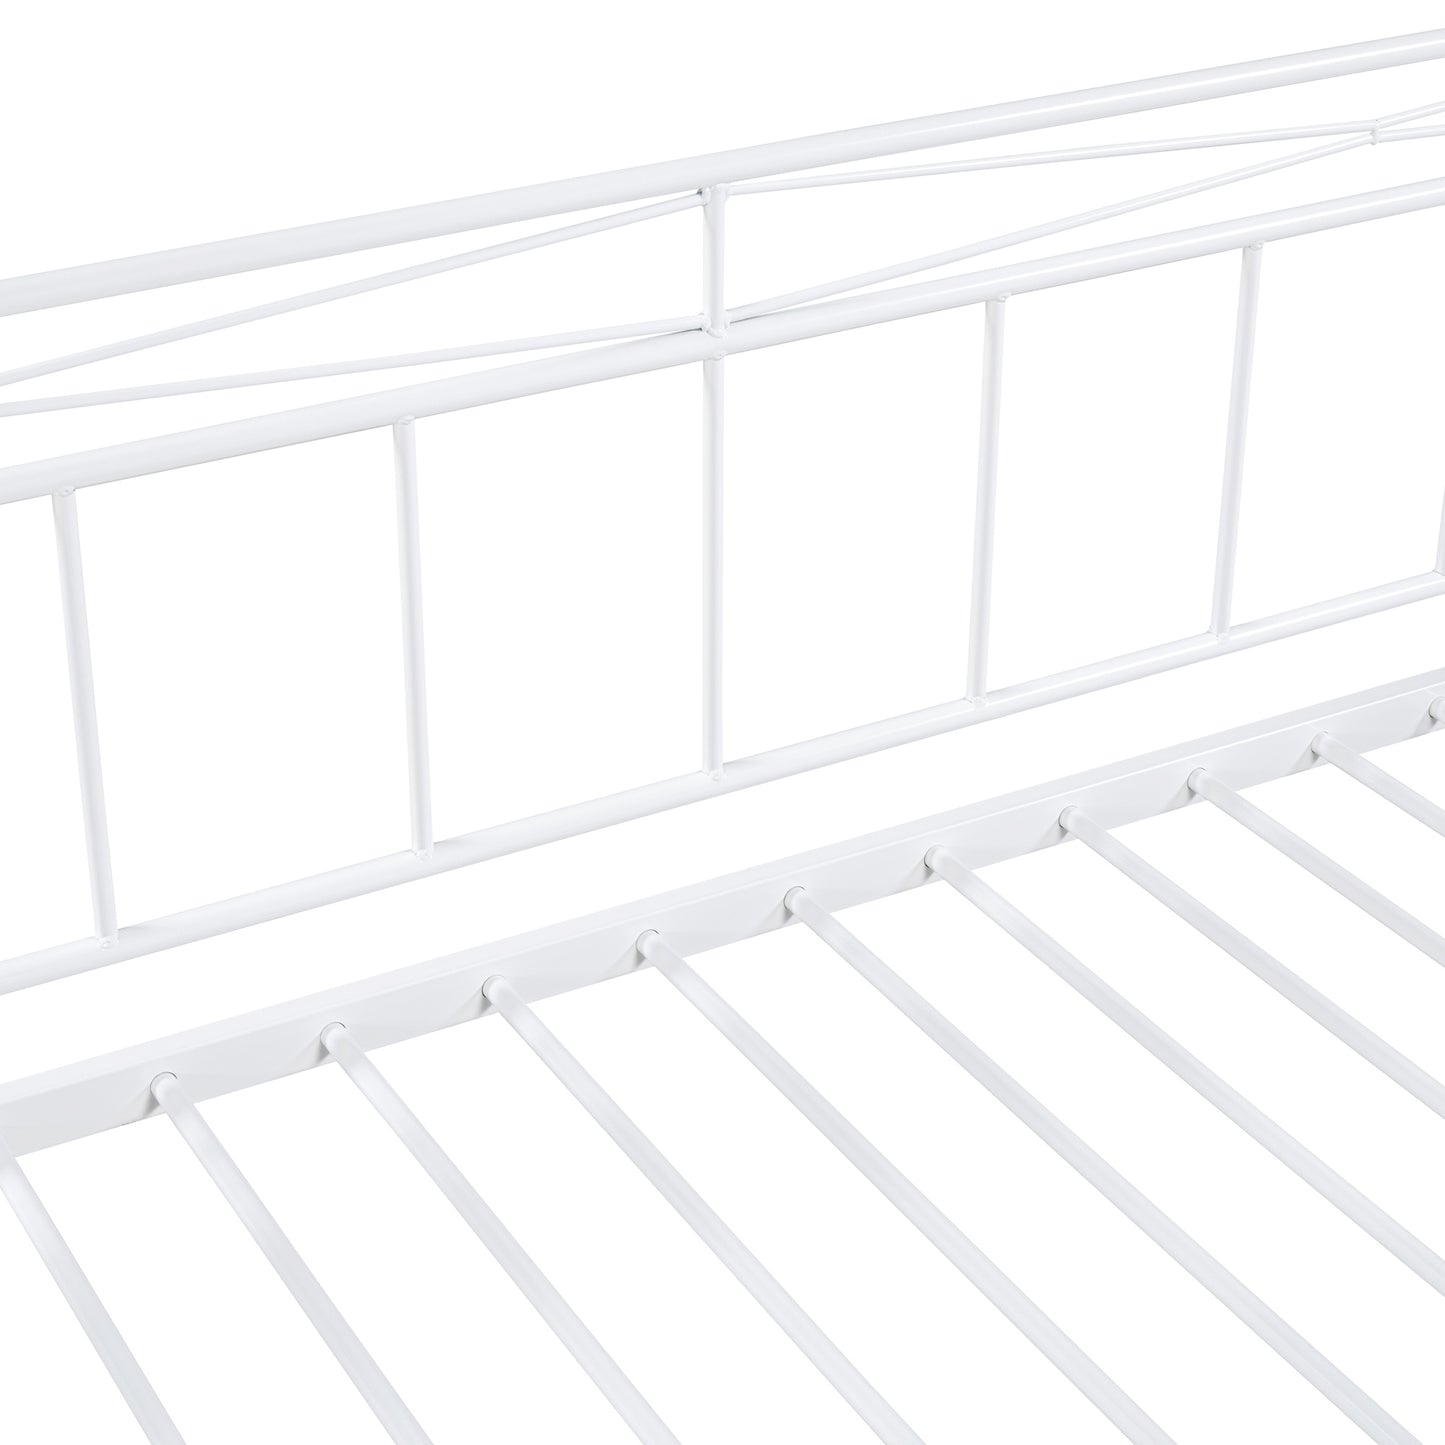 Full Size Metal Daybed with Twin Size Adjustable Trundle, Portable Folding Trundle, White